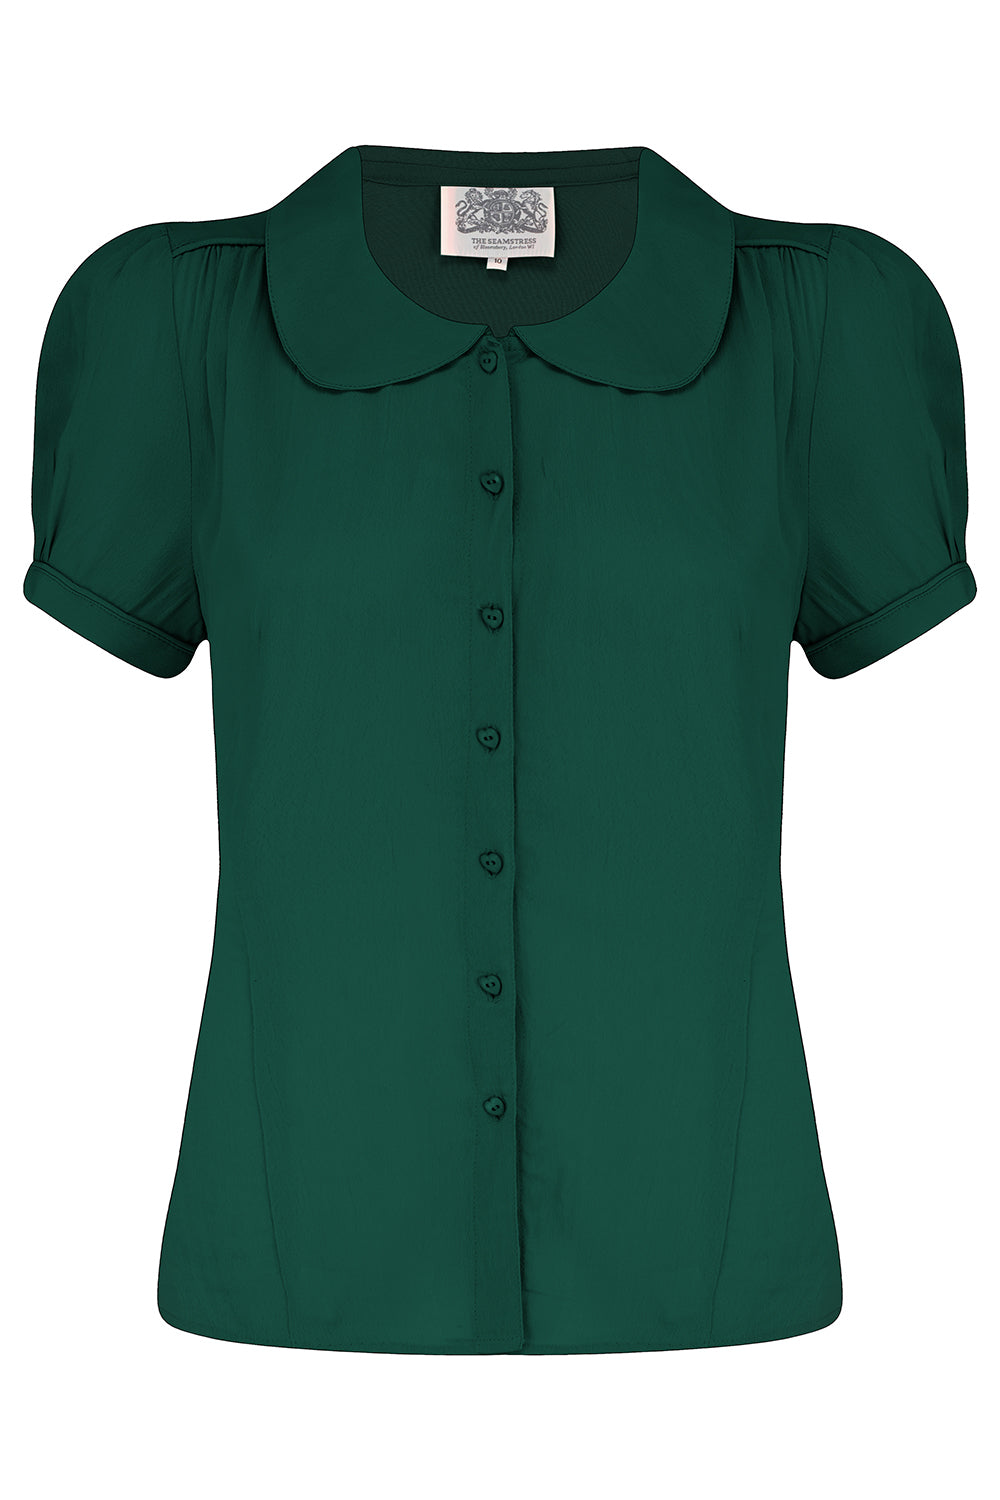 The "Jive blouse" in Green , Classic 1940s Vintage Style